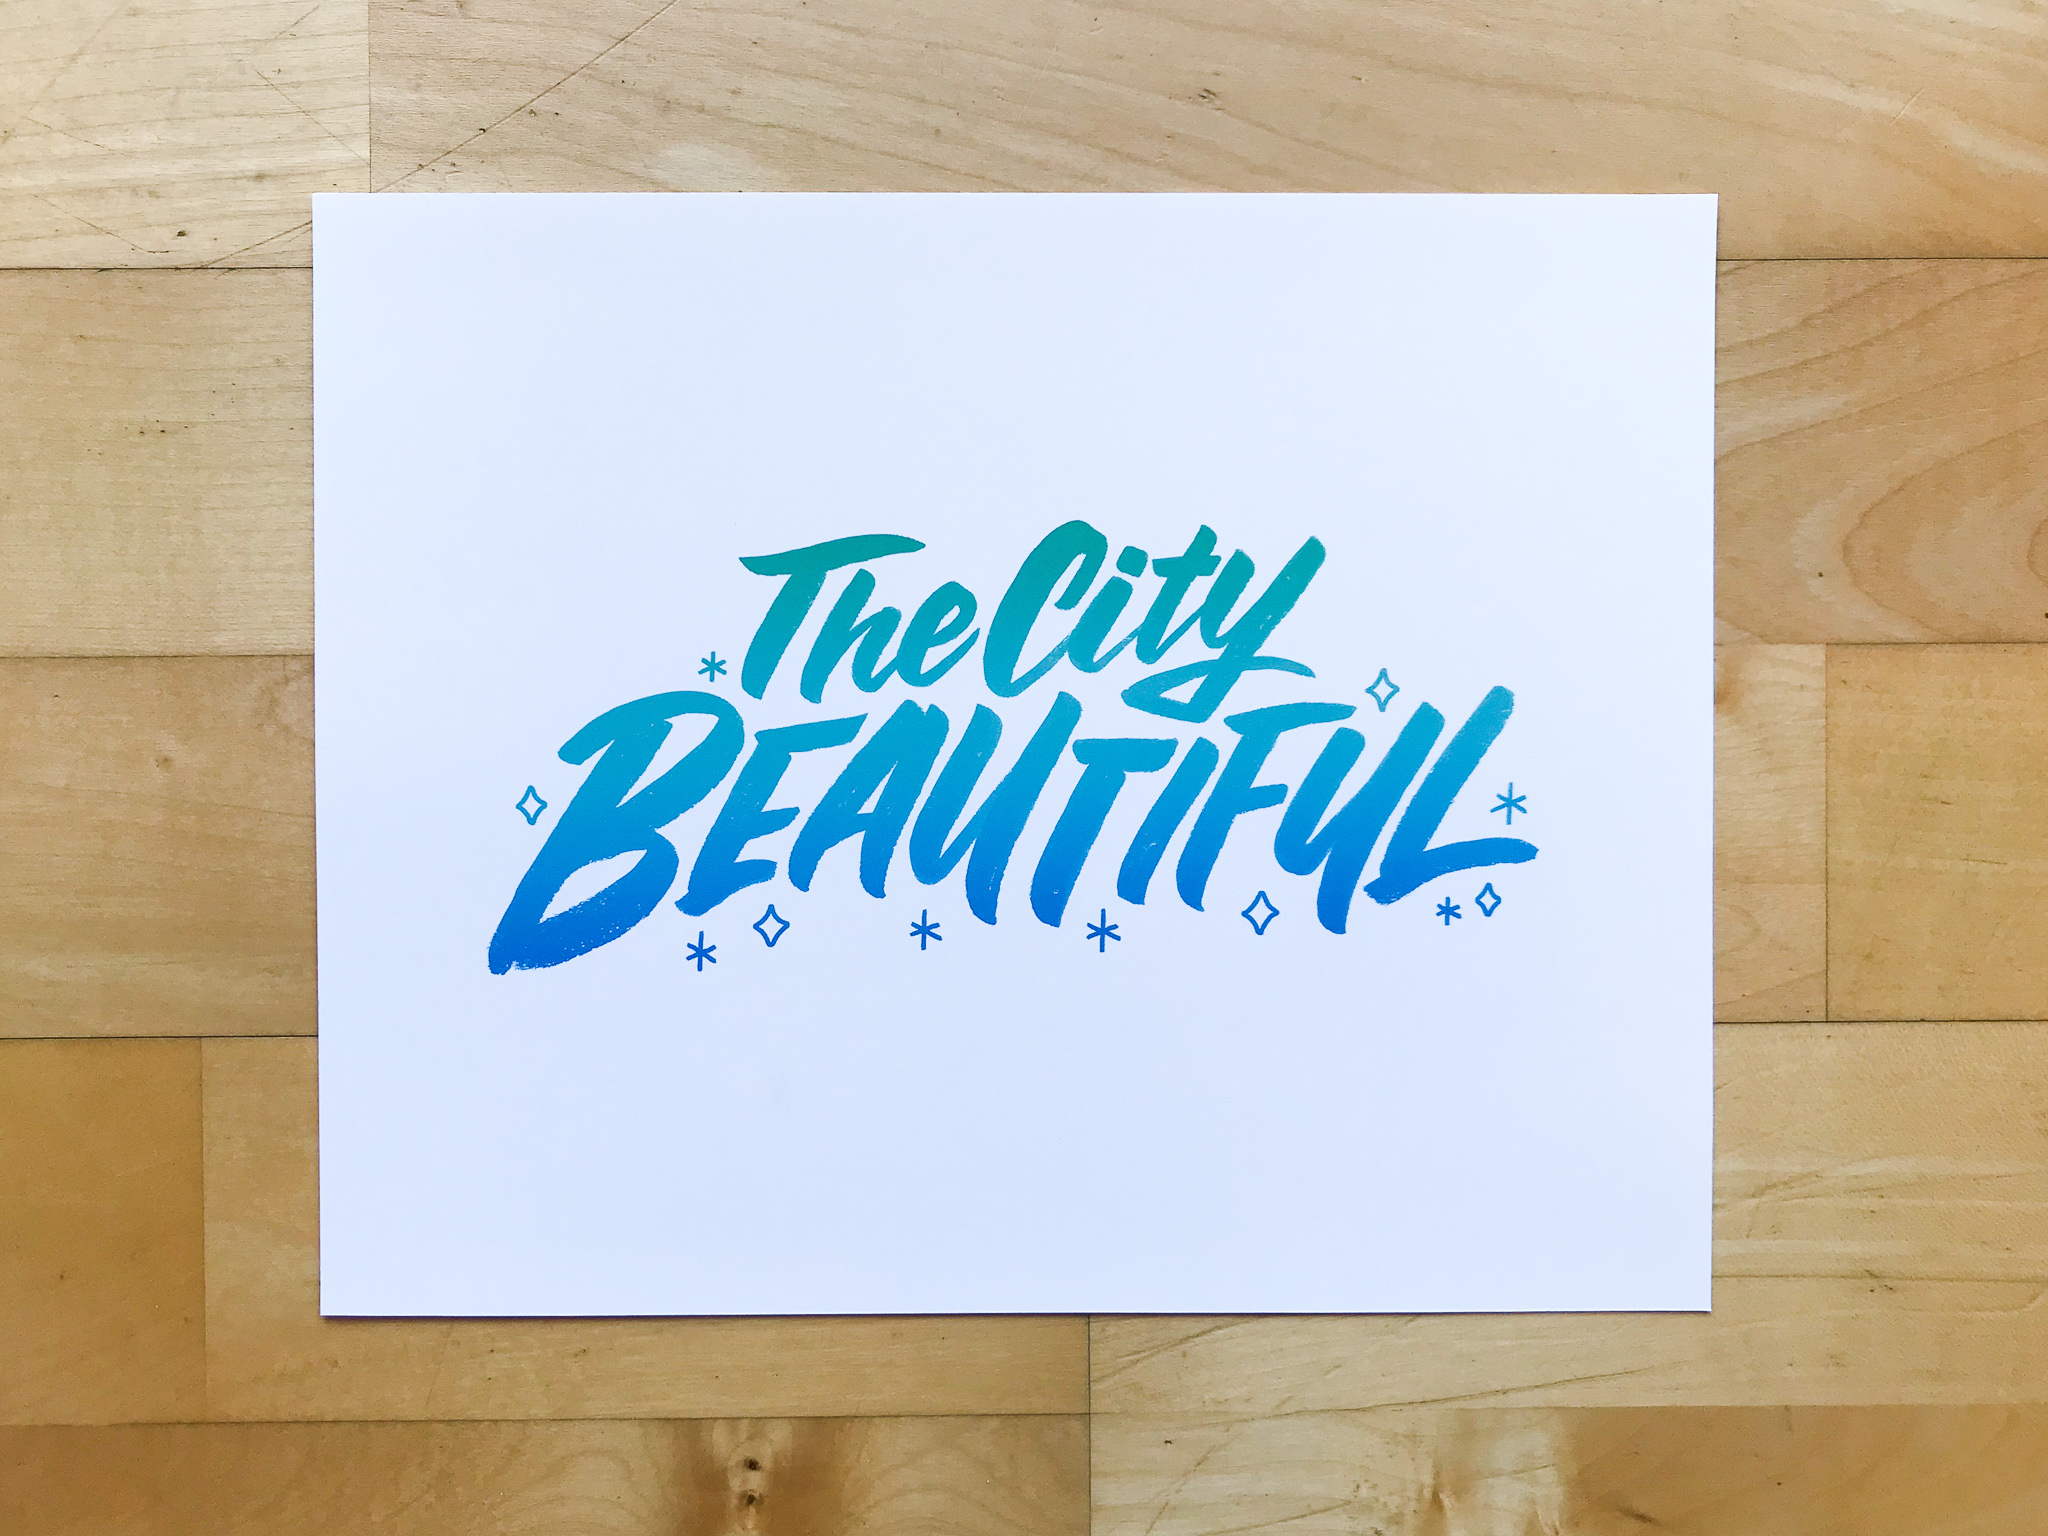 Downtown Orlando Neighborhood prints hand lettered by Hillery Powers